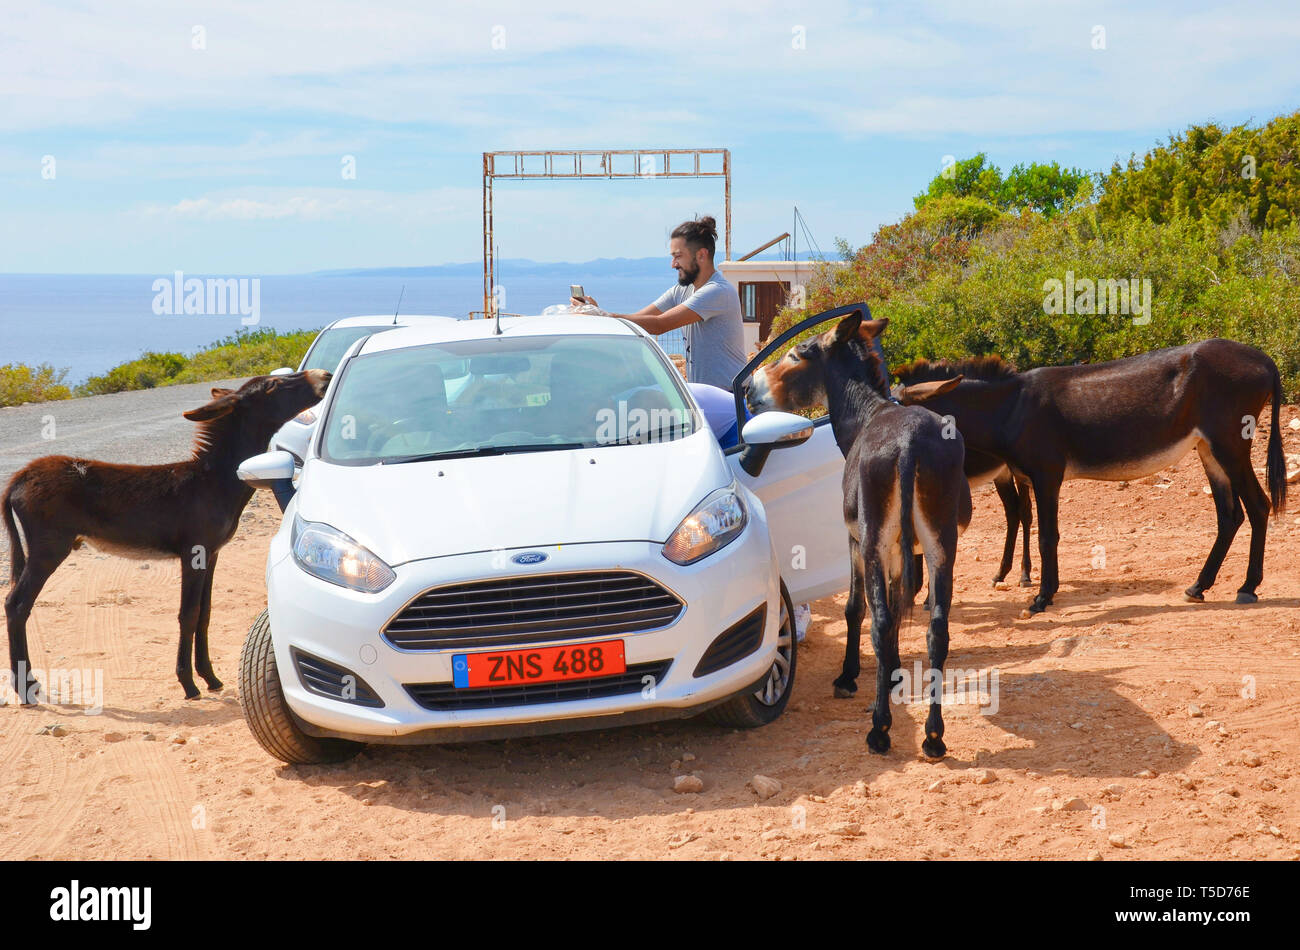 Karpaz Peninsula, Northern Cyprus - Oct 3rd 2018: Young man taking picture of wild donkeys with phone. The donkeys are standing around his opened car. Taken on sunny day with blue sea in background. Stock Photo